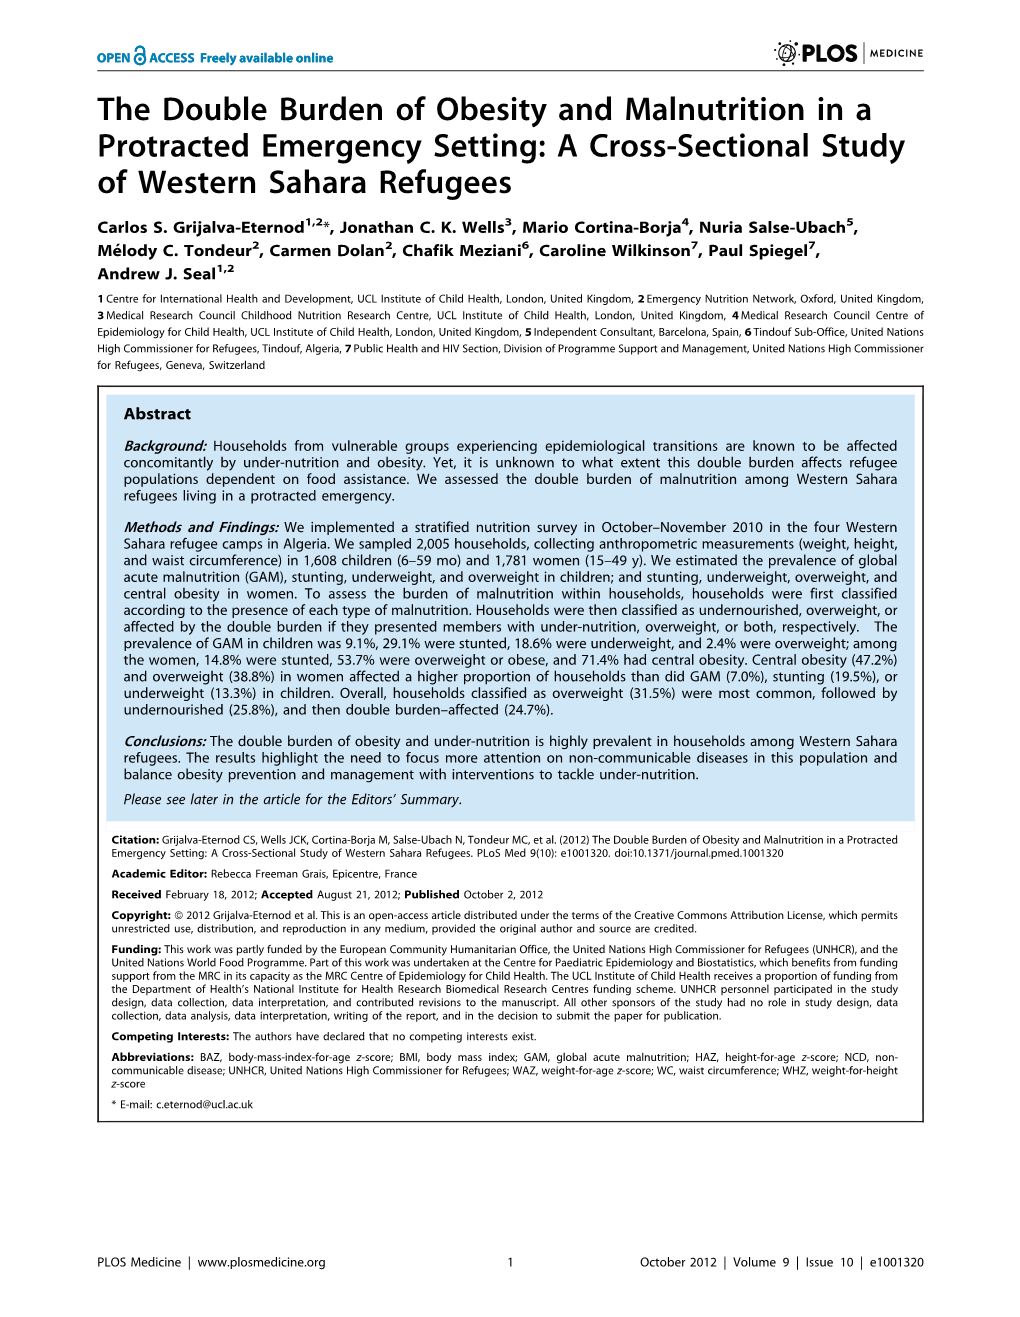 The Double Burden of Obesity and Malnutrition in a Protracted Emergency Setting: a Cross-Sectional Study of Western Sahara Refugees